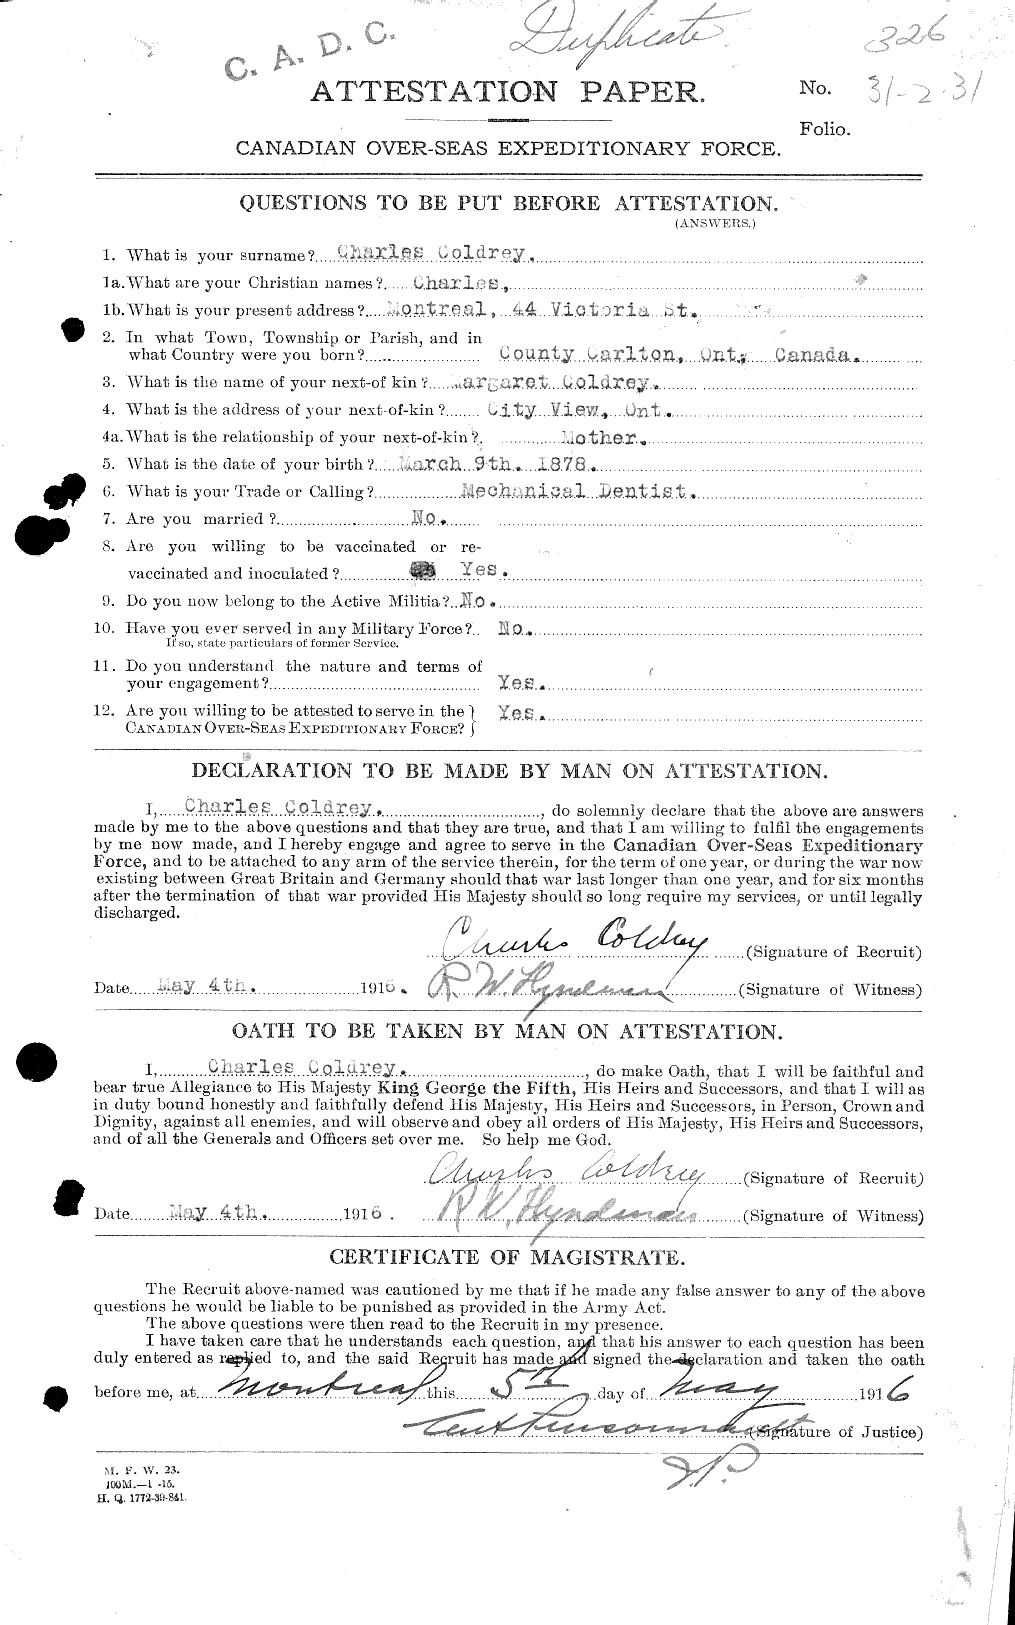 Personnel Records of the First World War - CEF 027521a